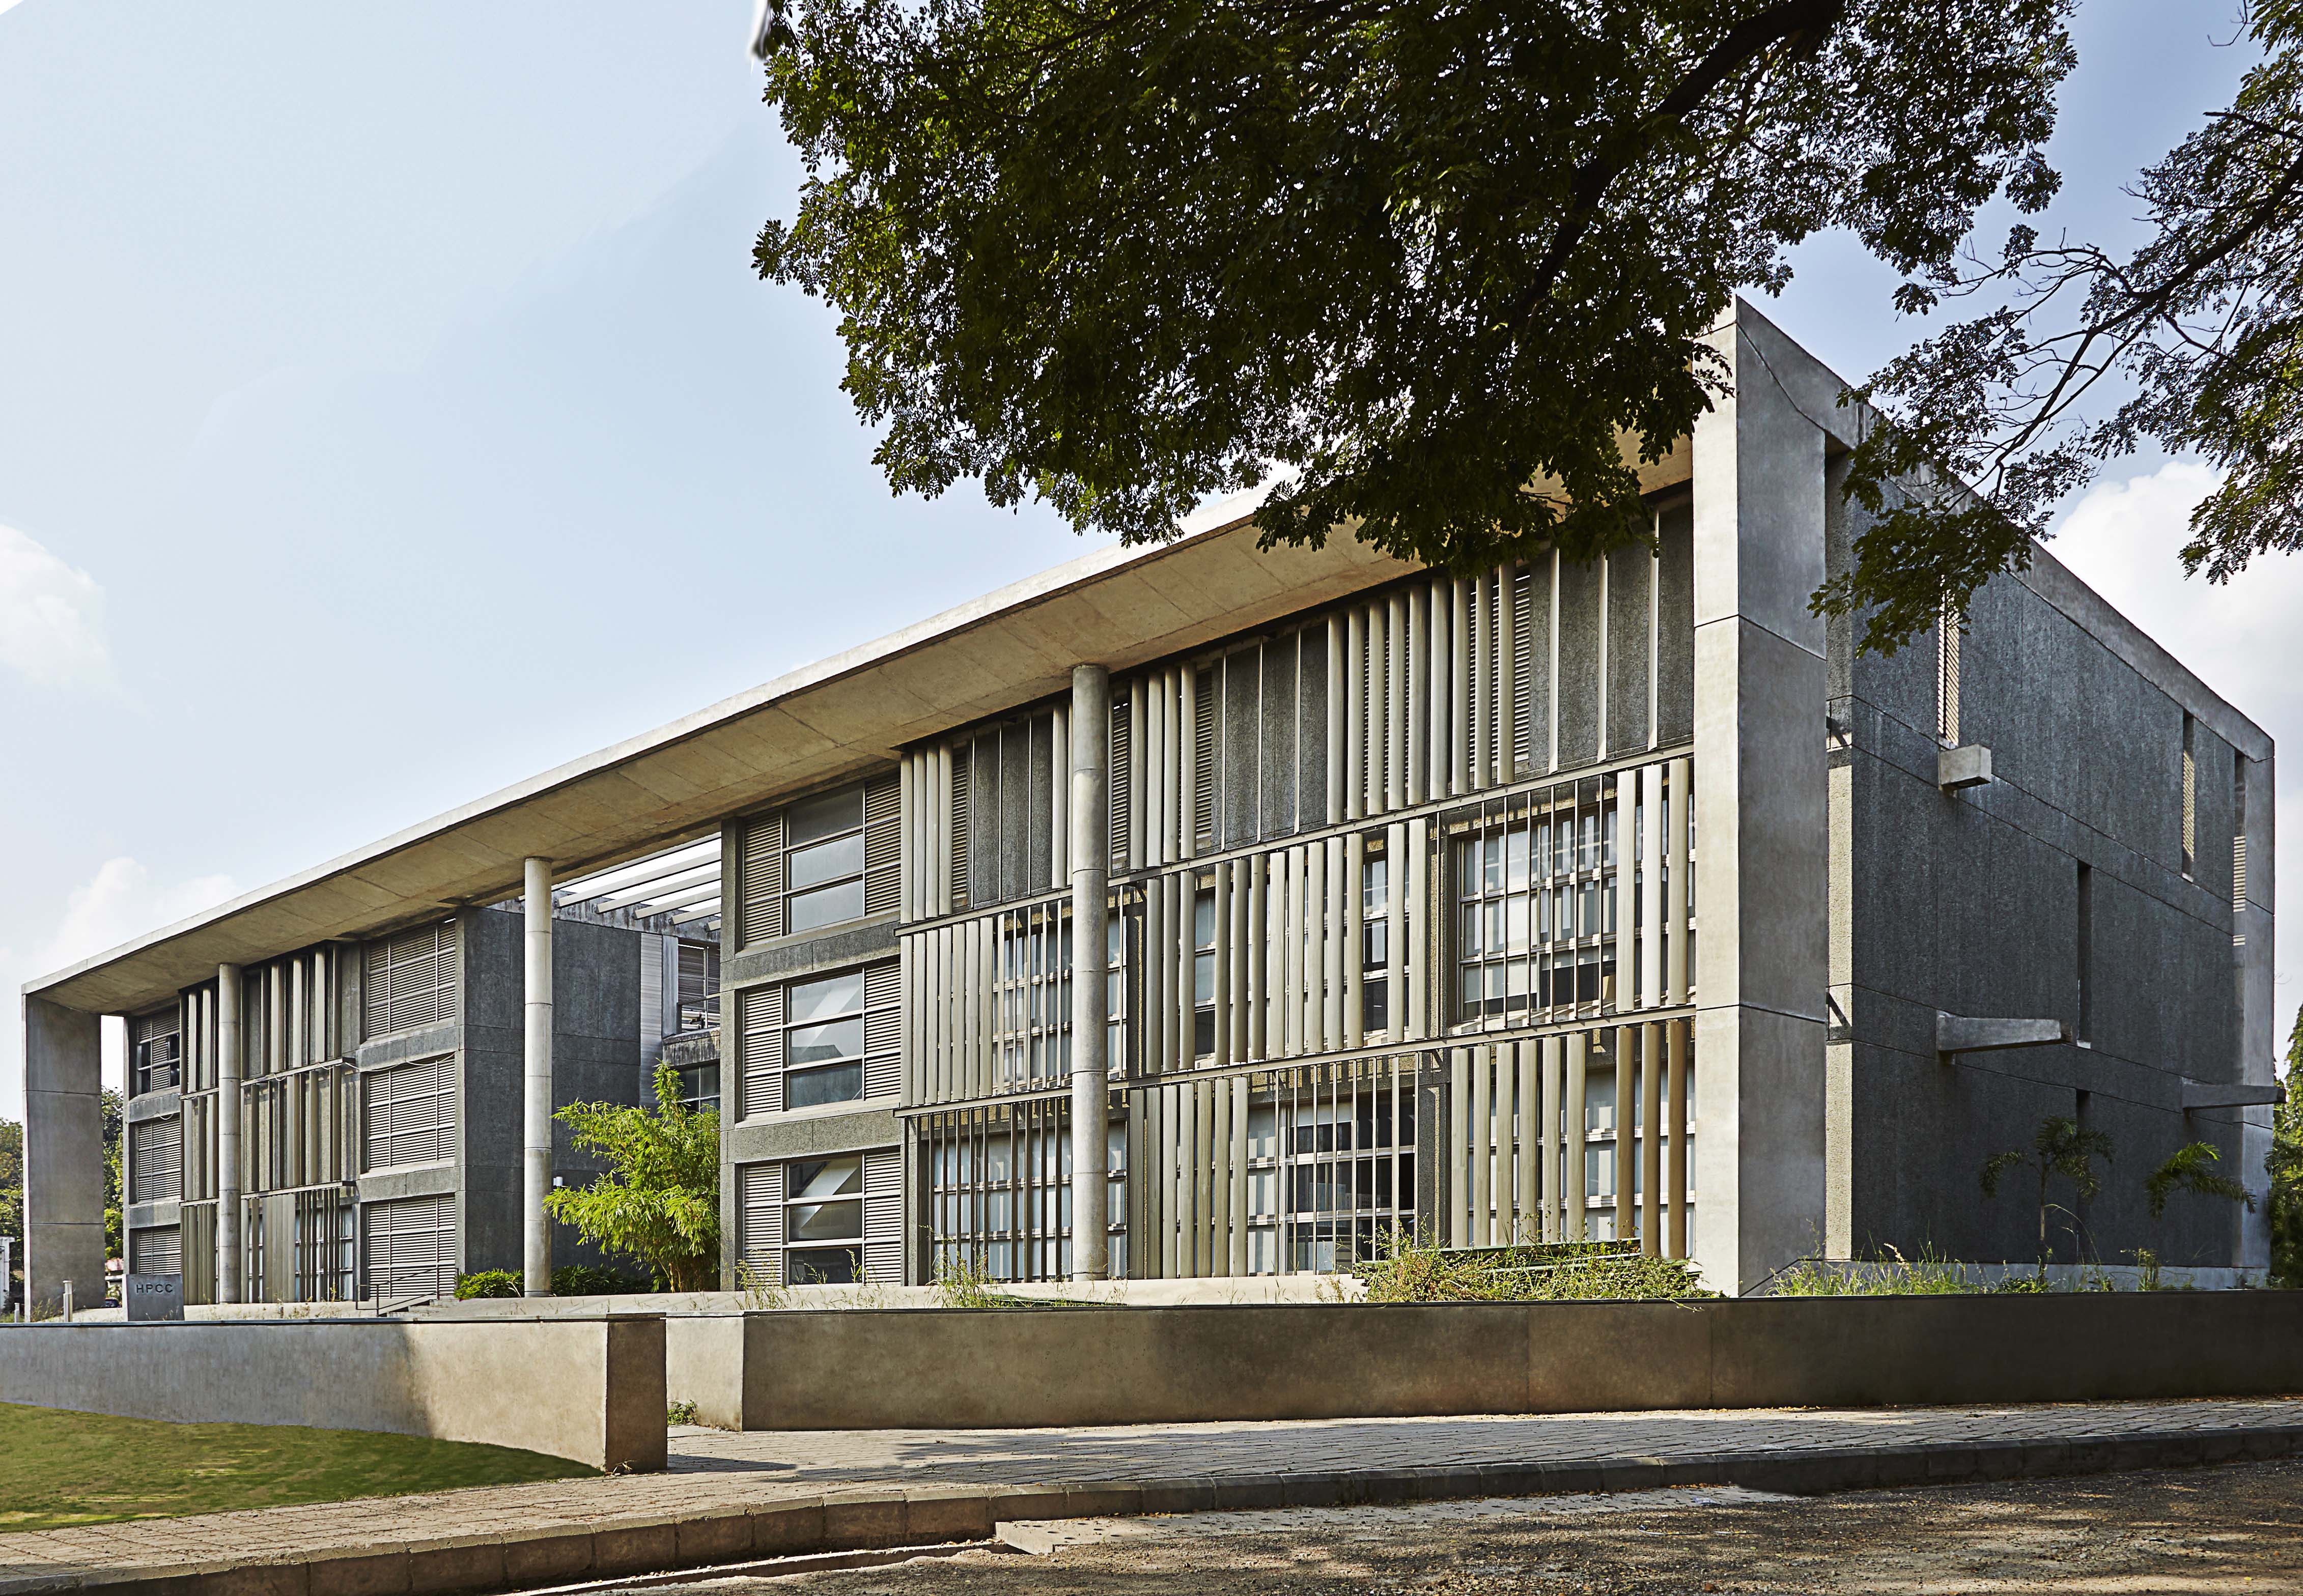 HPCC+CCCR at Pune by Madhav Joshi and Associates